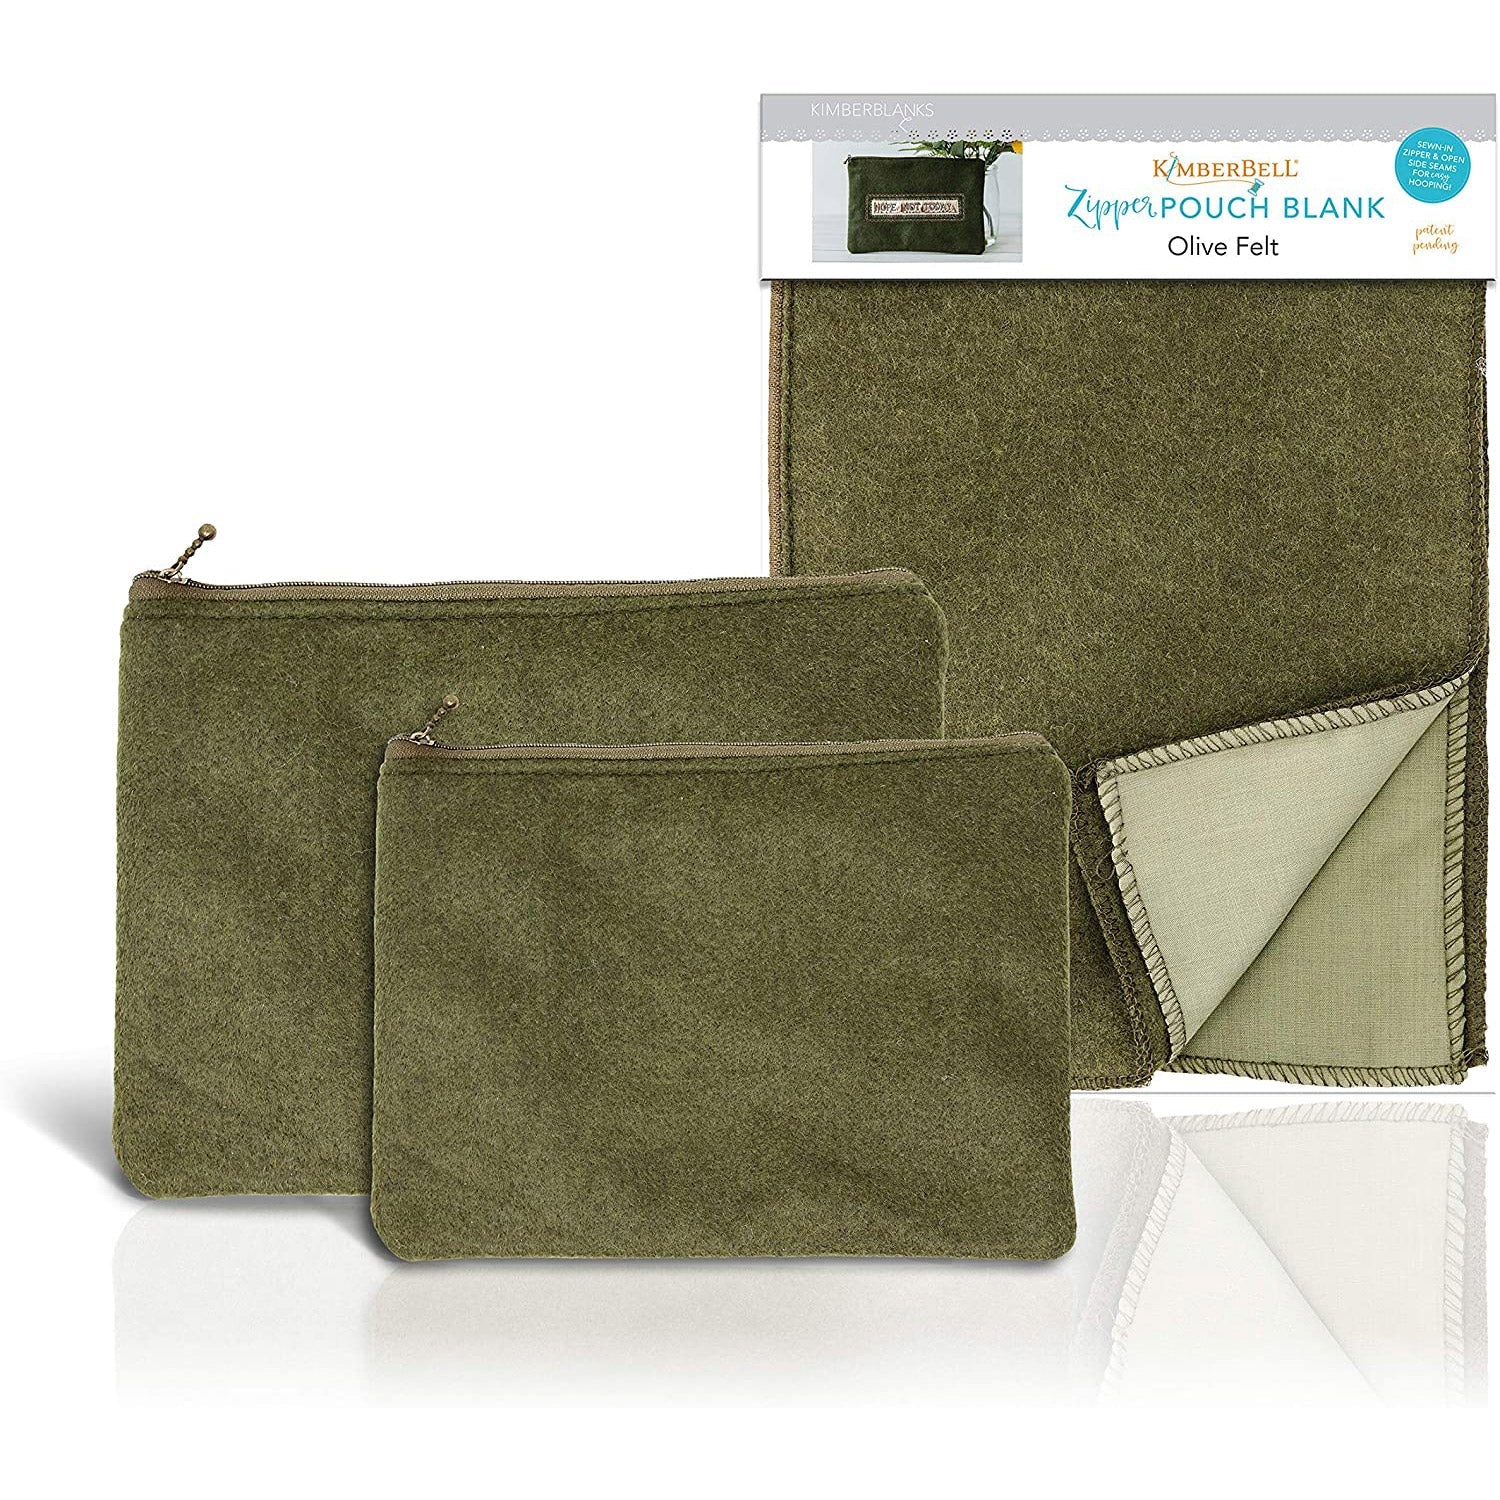 Zipper Pouch Blanks in Olive Felt by Kimberbell is available in two sizes: Small (KDKB227) and Large (KDKB228). The patent pending design features an open side seam to make adding your favorite design or personalization easier than ever, and a simple straight stitch completes the bag after the design is added.  Each bag is fully lined and features a decorative zipper pull.